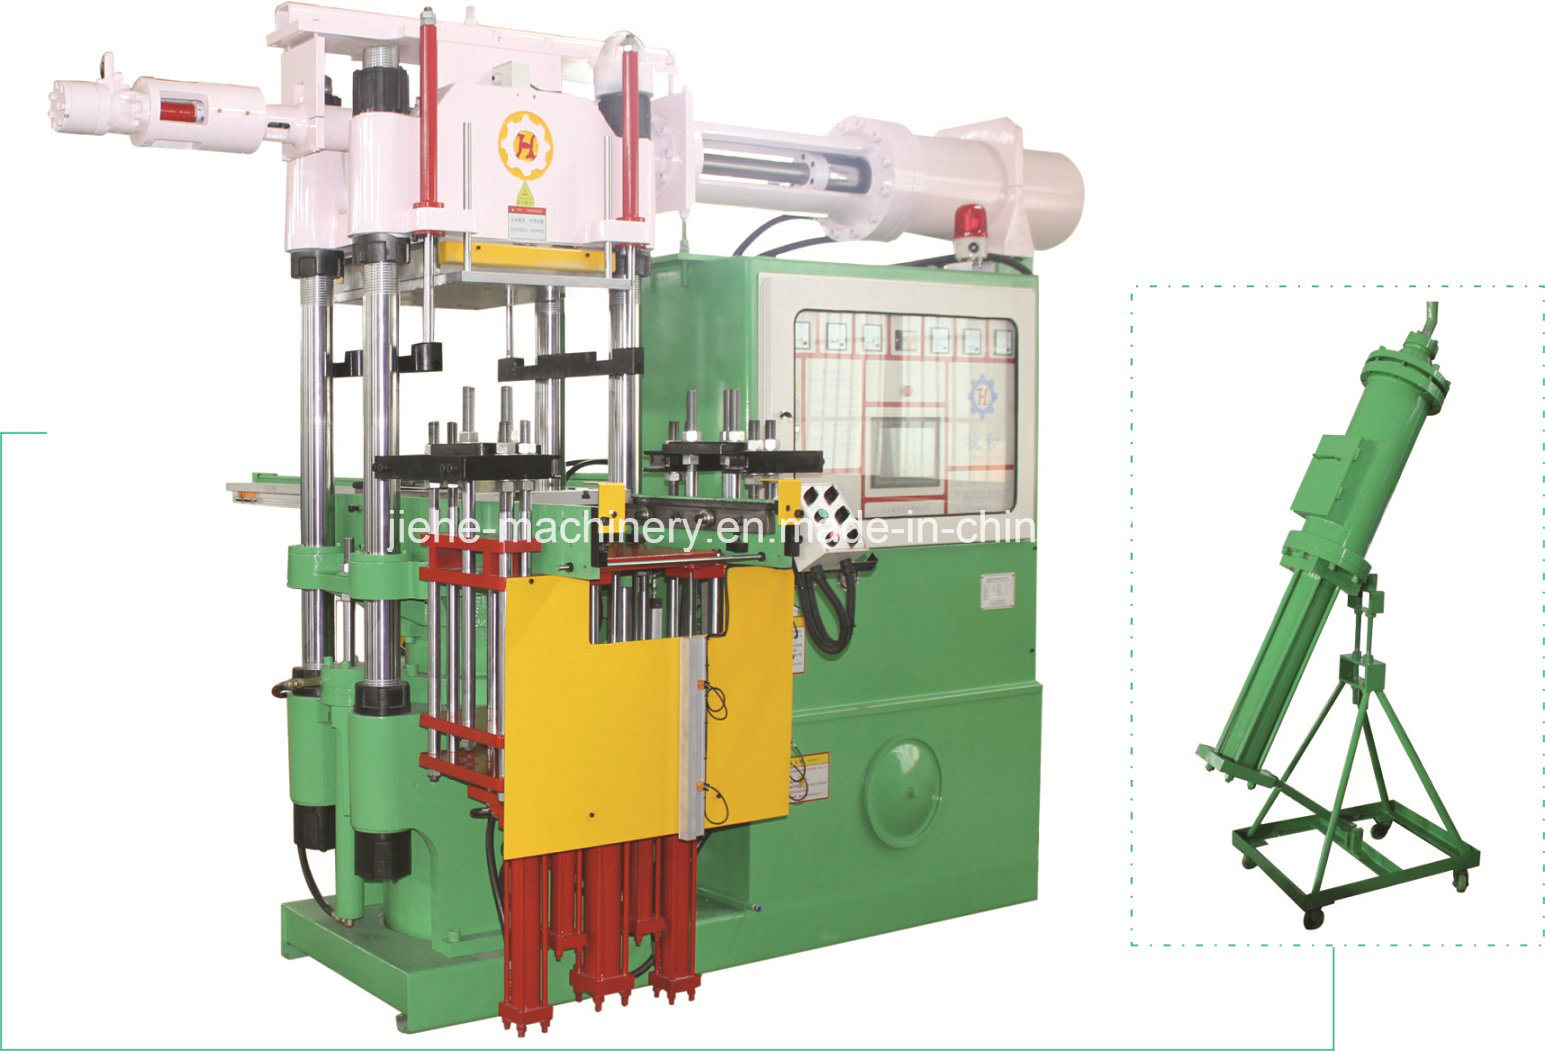 200t Horizontal Automatic Rubber Silicone Injection Molding Machinery